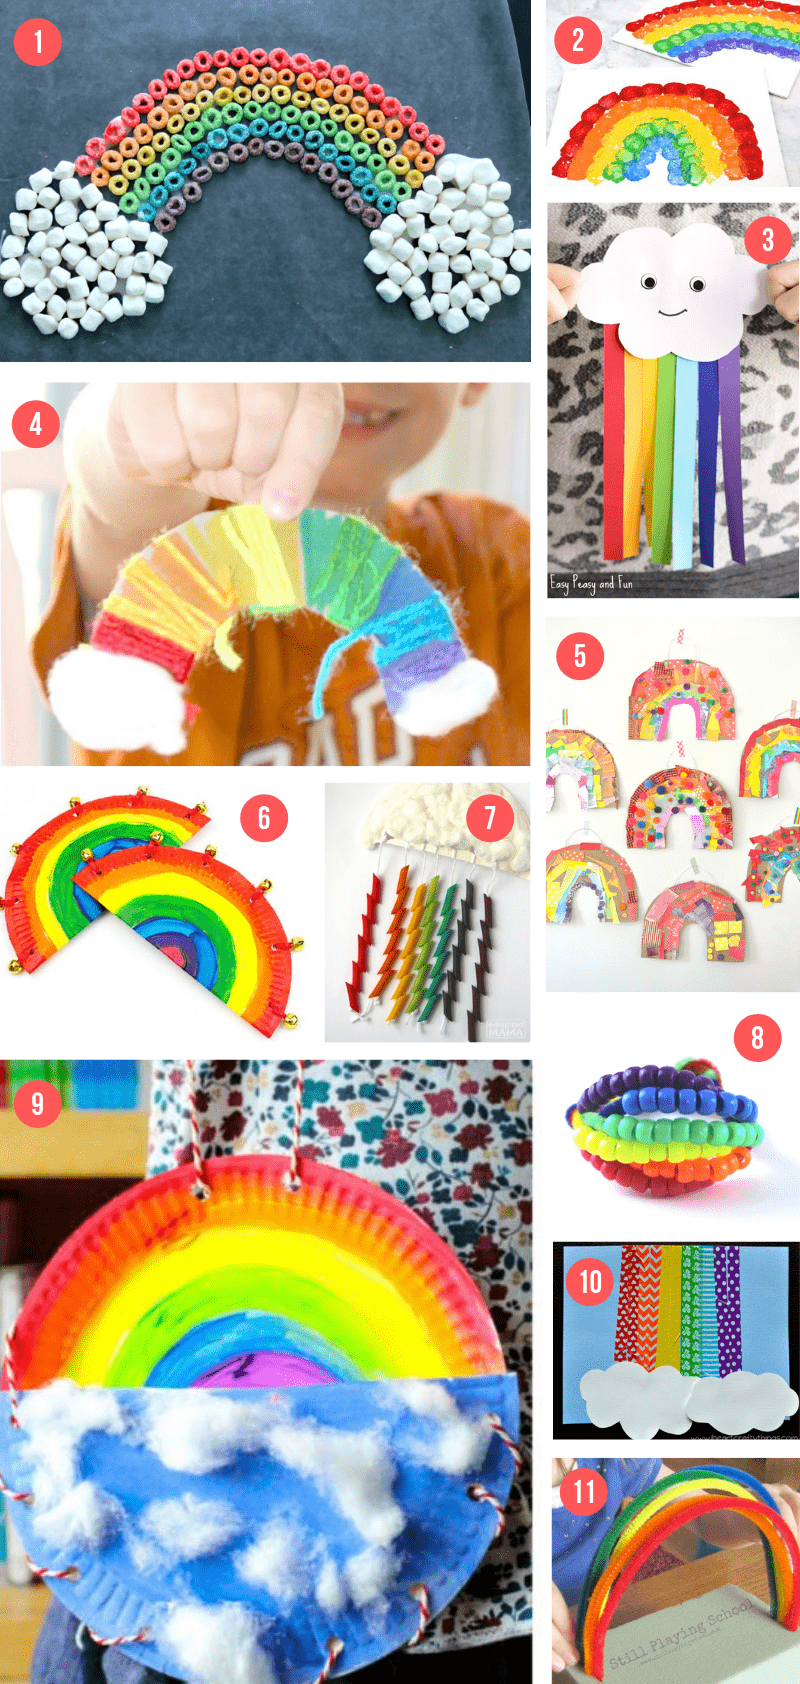 Spring Crafts for Kids - Art and Craft Project Ideas for All Ages